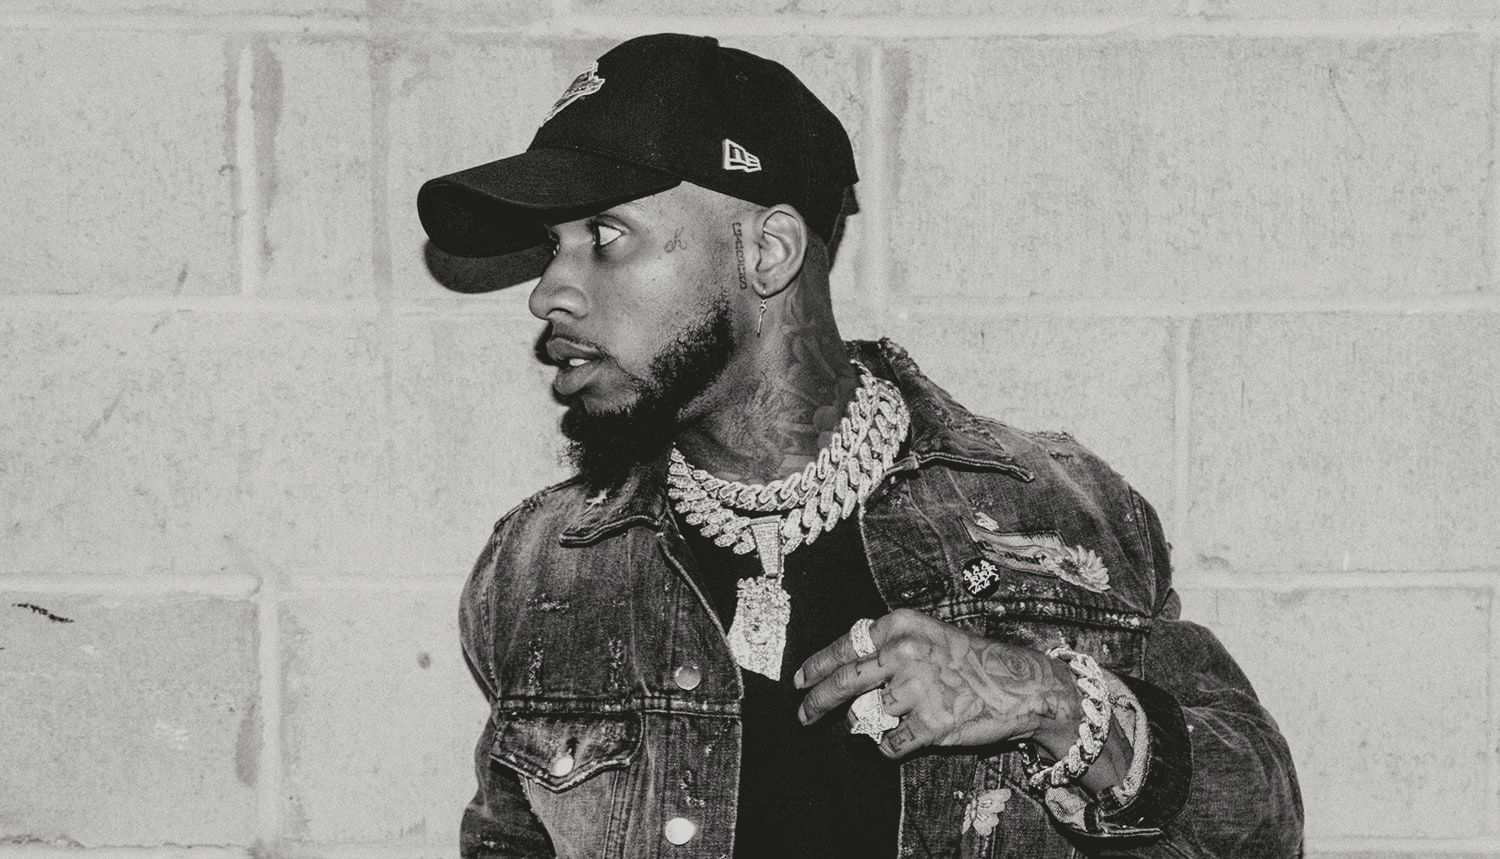 Tory Lanez Releases New Album ‘Sorry 4 What’